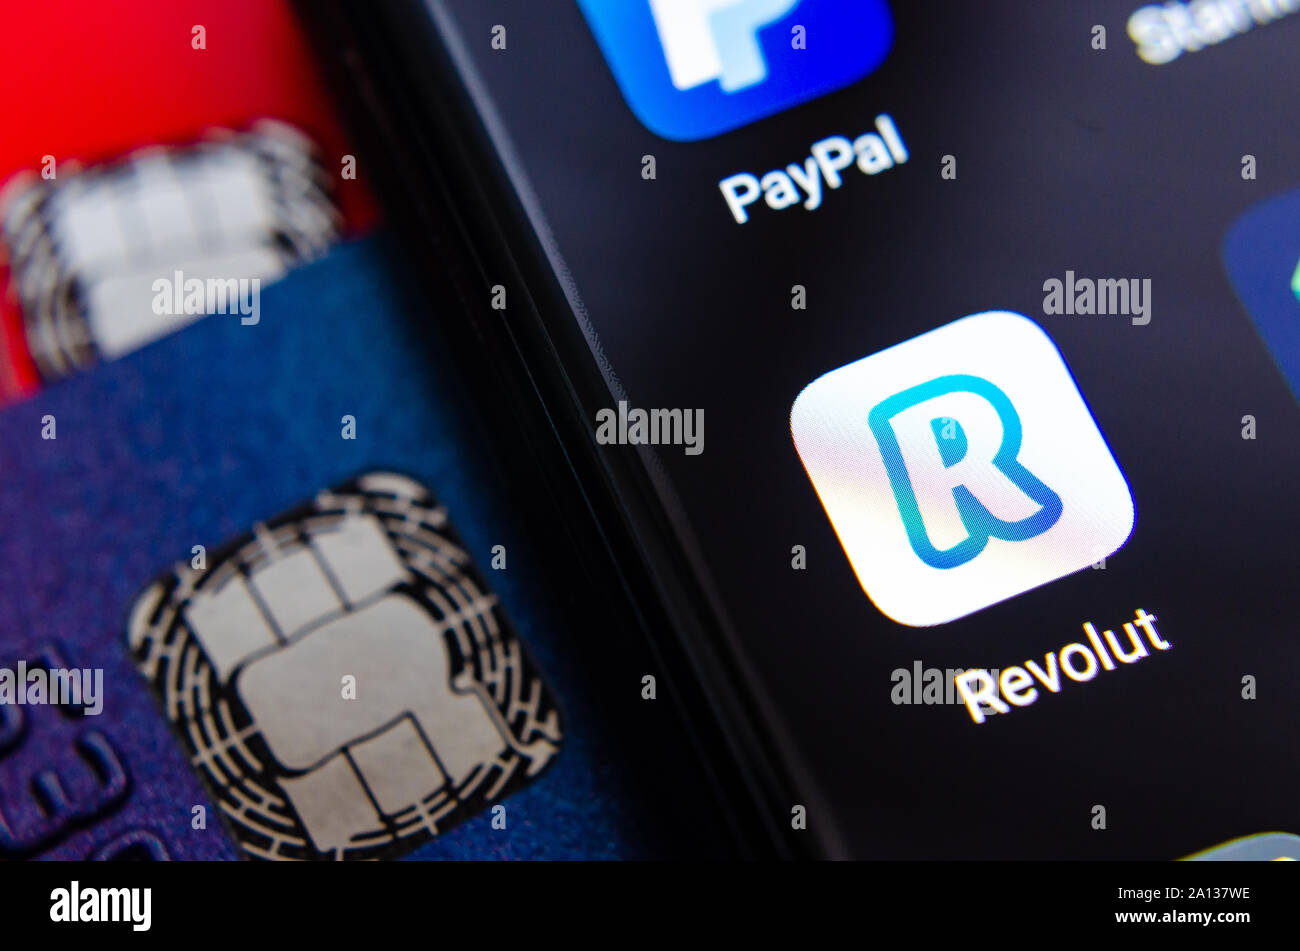 Revolut bank app on the smartphone screen, next to bank cards. Stock Photo